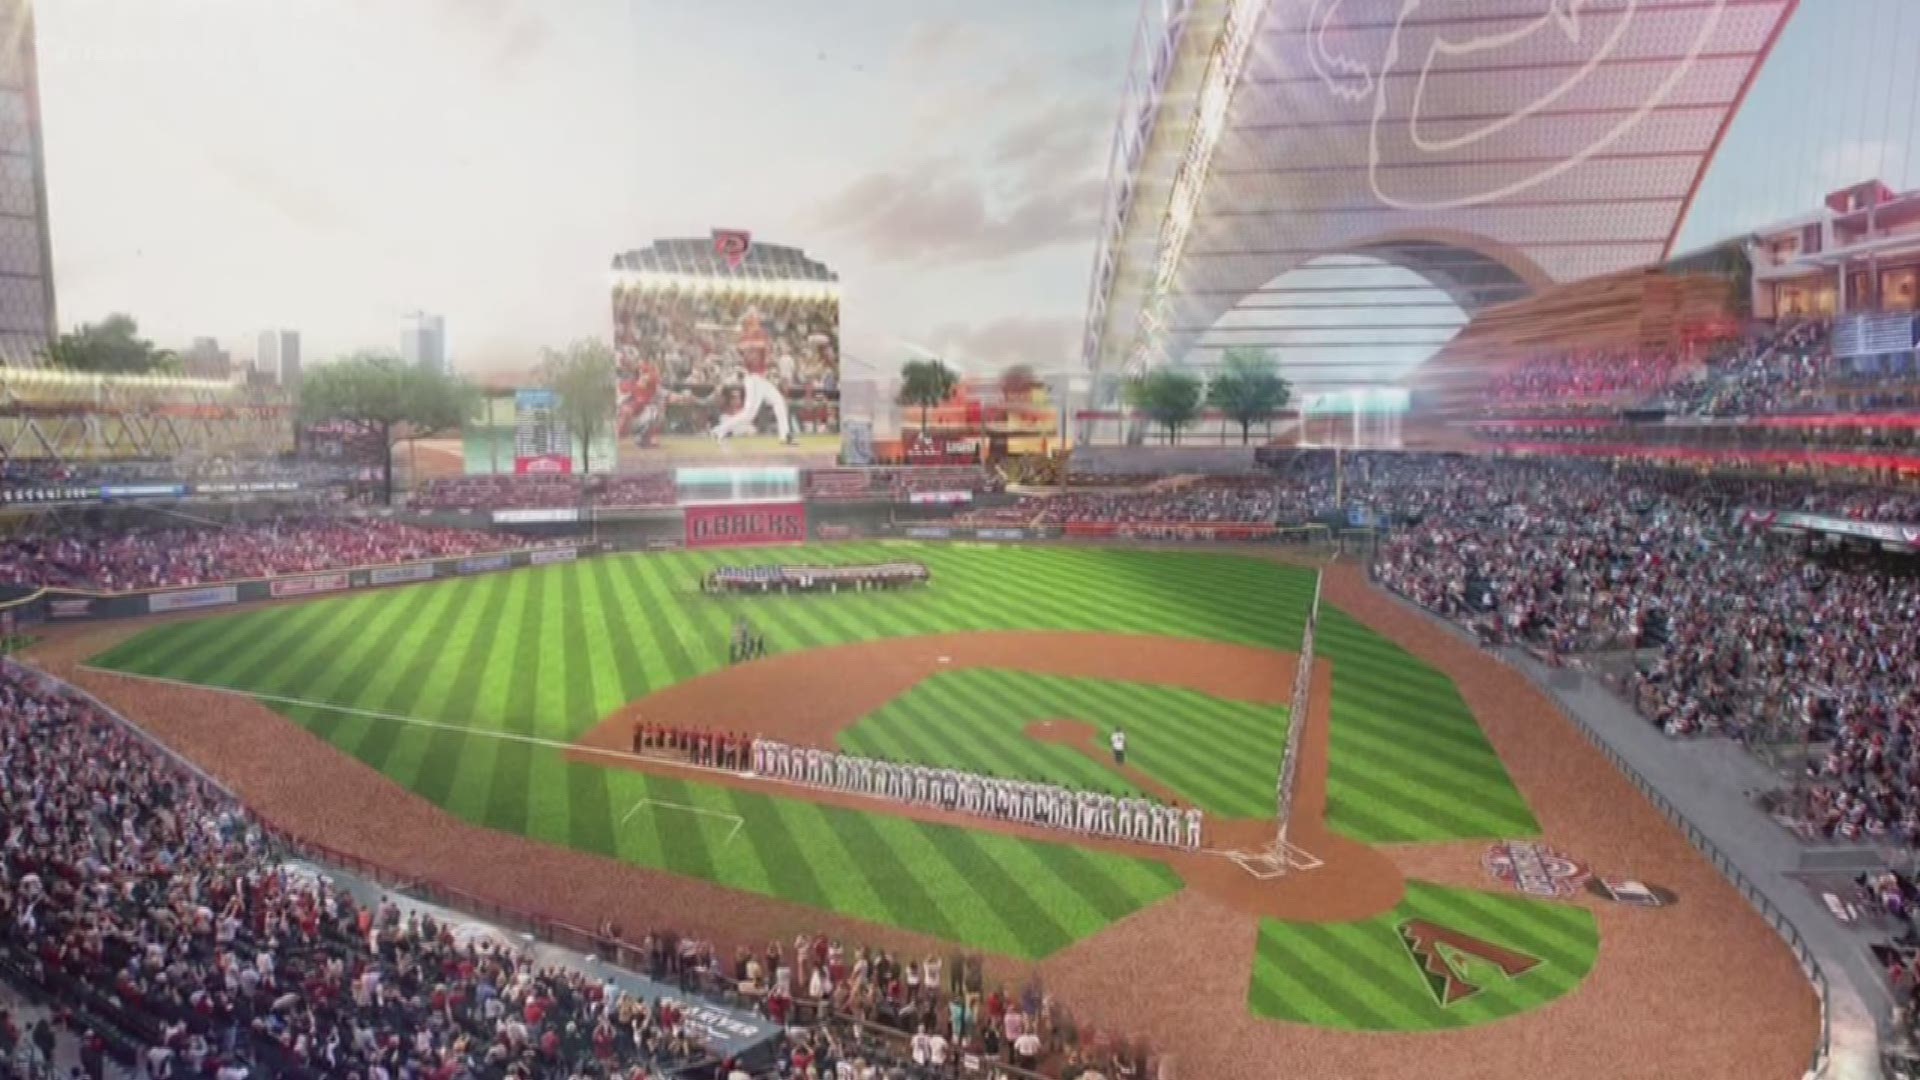 Are these images of a possible new stadium for the Arizona Diamondbacks?